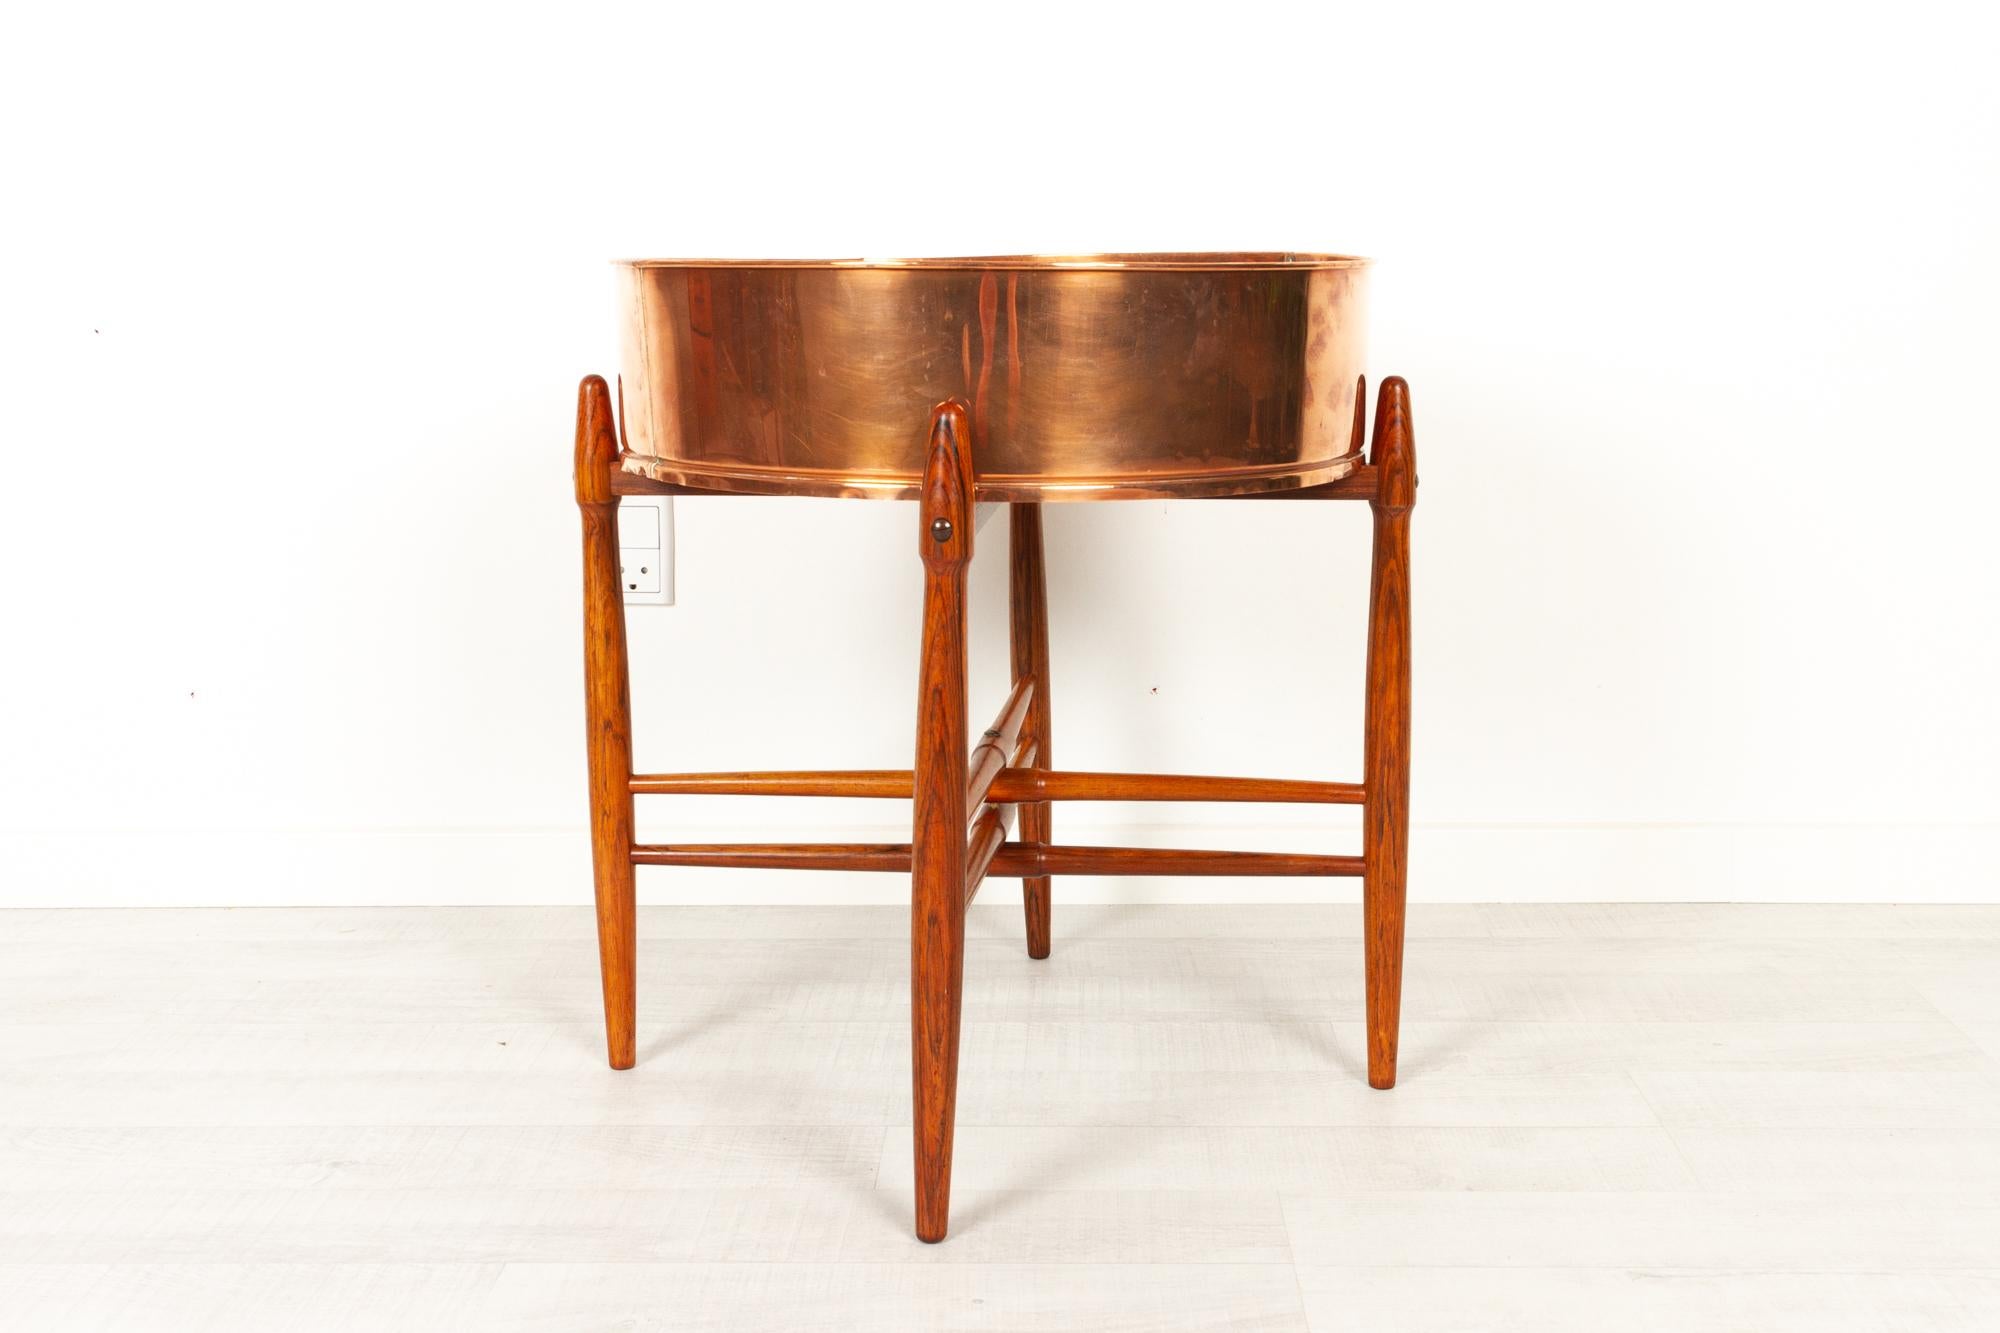 Vintage Danish planter, 1960s
Circular side table frame designed by Poul Hundevad for Vamdrup fitted with a copper planter. Round tapered legs in solid Rosewood. This is the large model palisander frame with a diameter of 53.5 cm and a height of 47